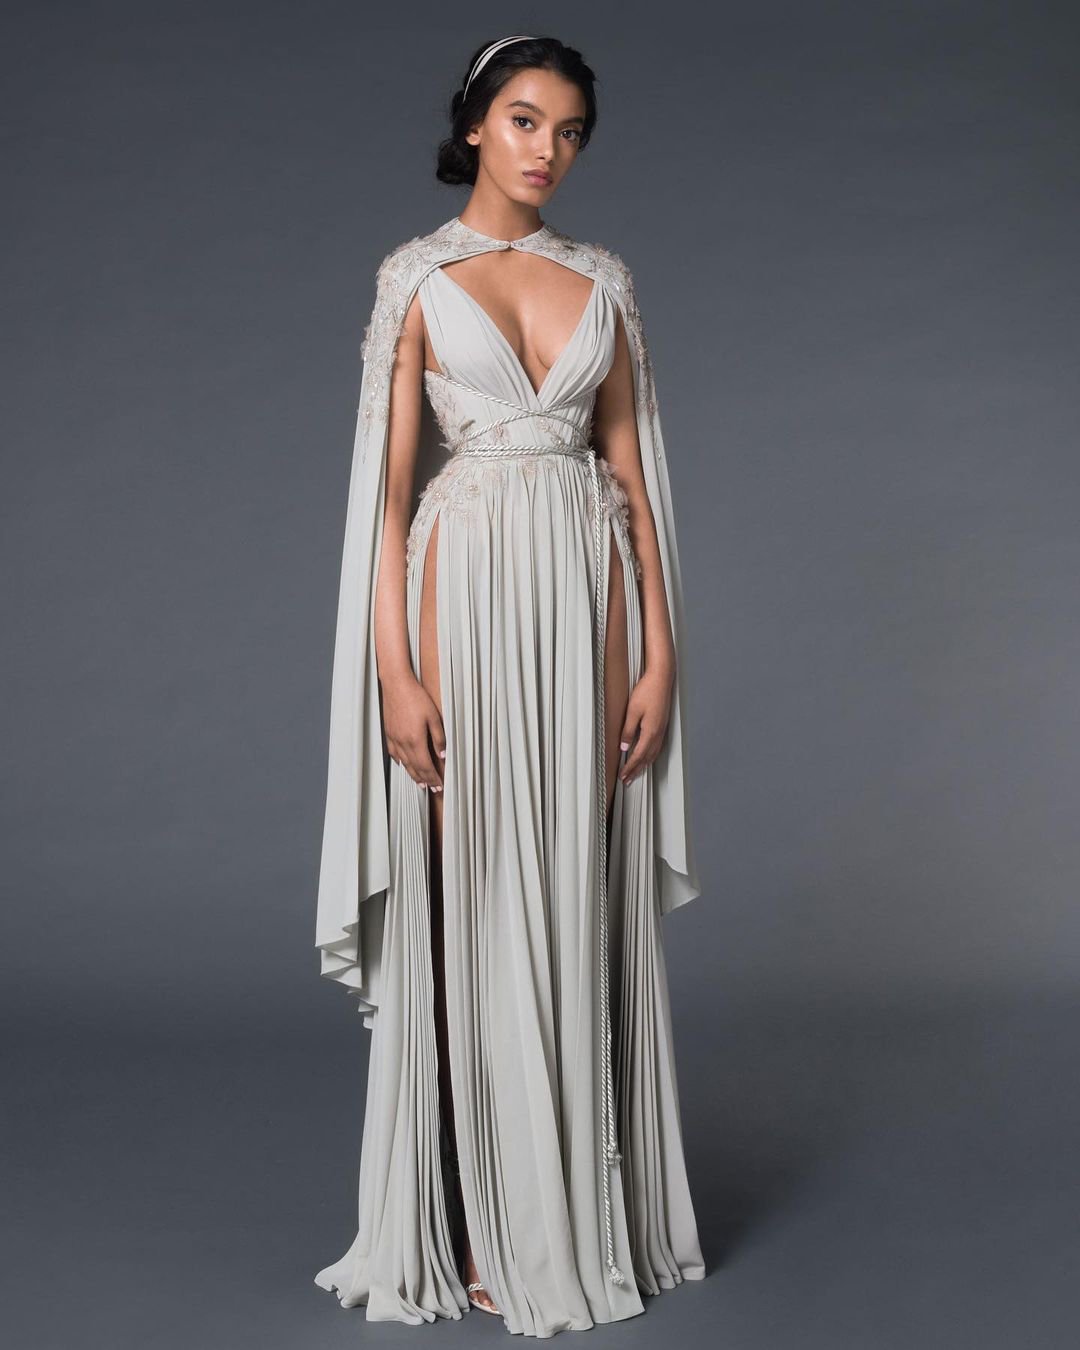 Best Greek Wedding Dress Traditions  The ultimate guide 